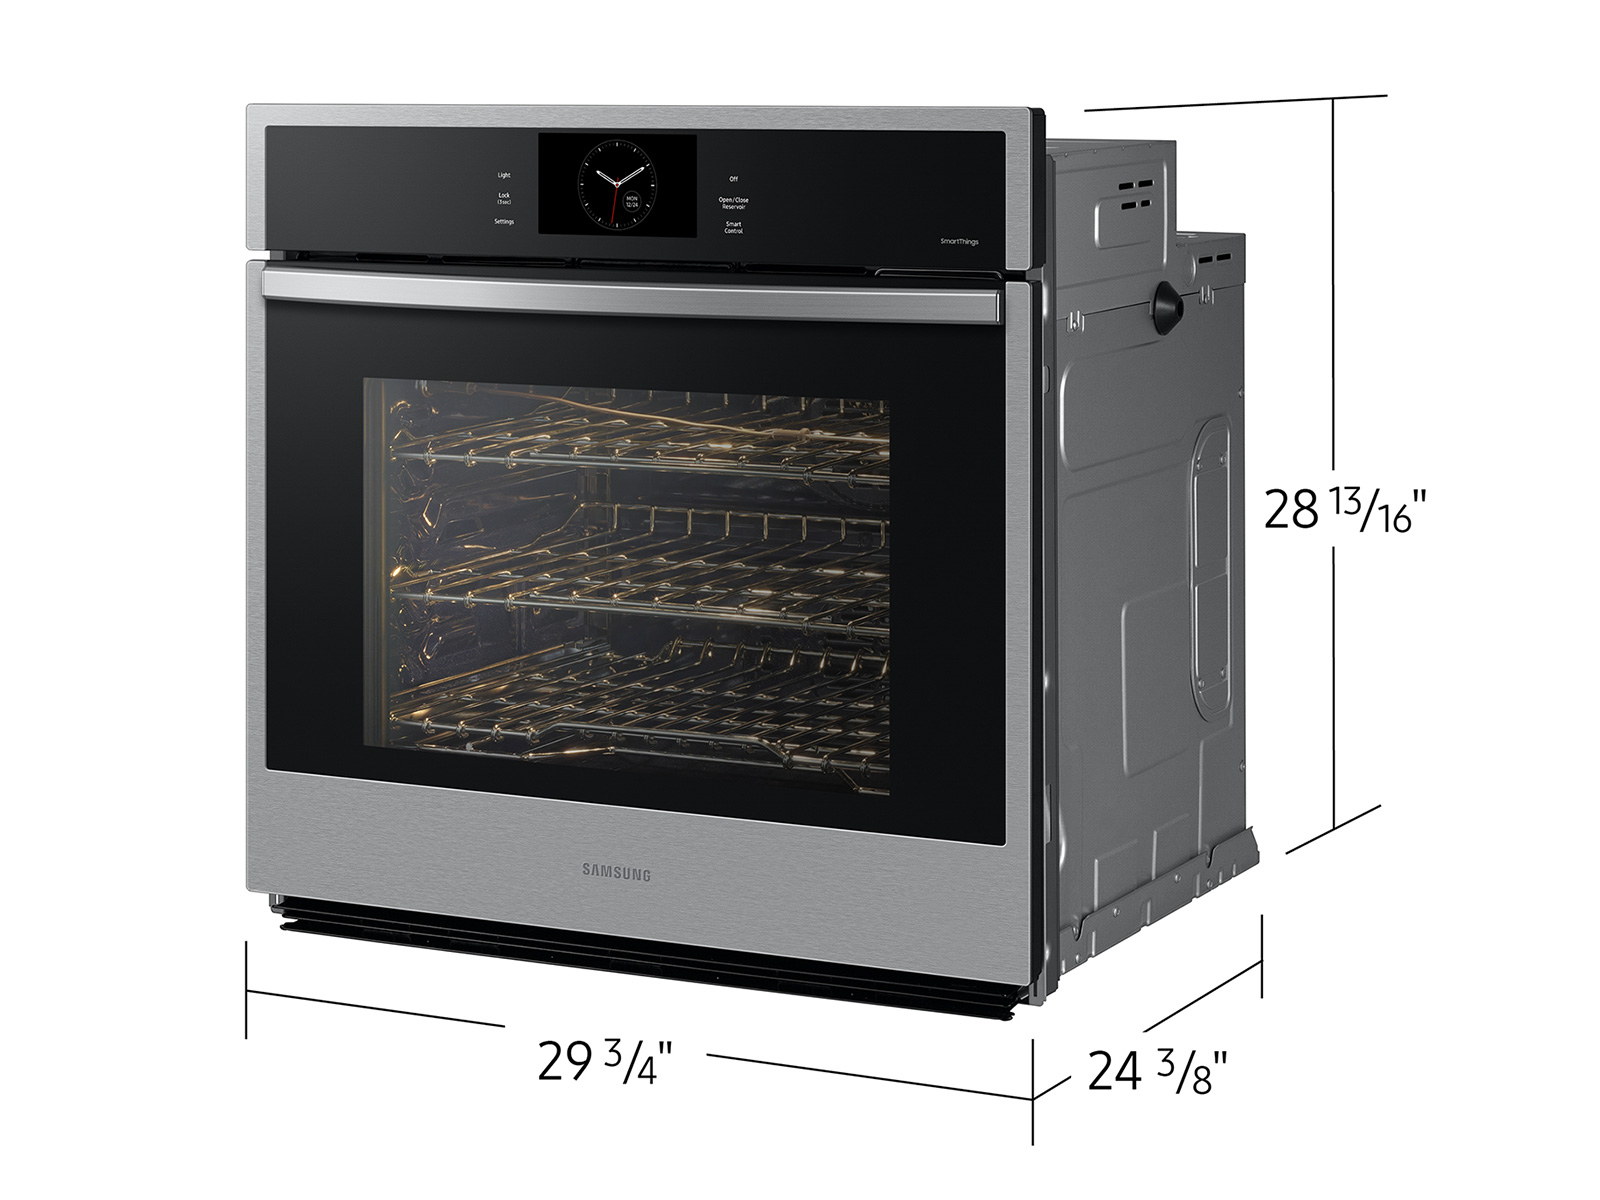 https://image-us.samsung.com/SamsungUS/home/home-appliances/wall-oven/nv51cg600ssraa/gallery/NV51CG600SSR_03_Dimension_Fraction_Stainless_Steel_SCOM.jpg?$product-details-jpg$